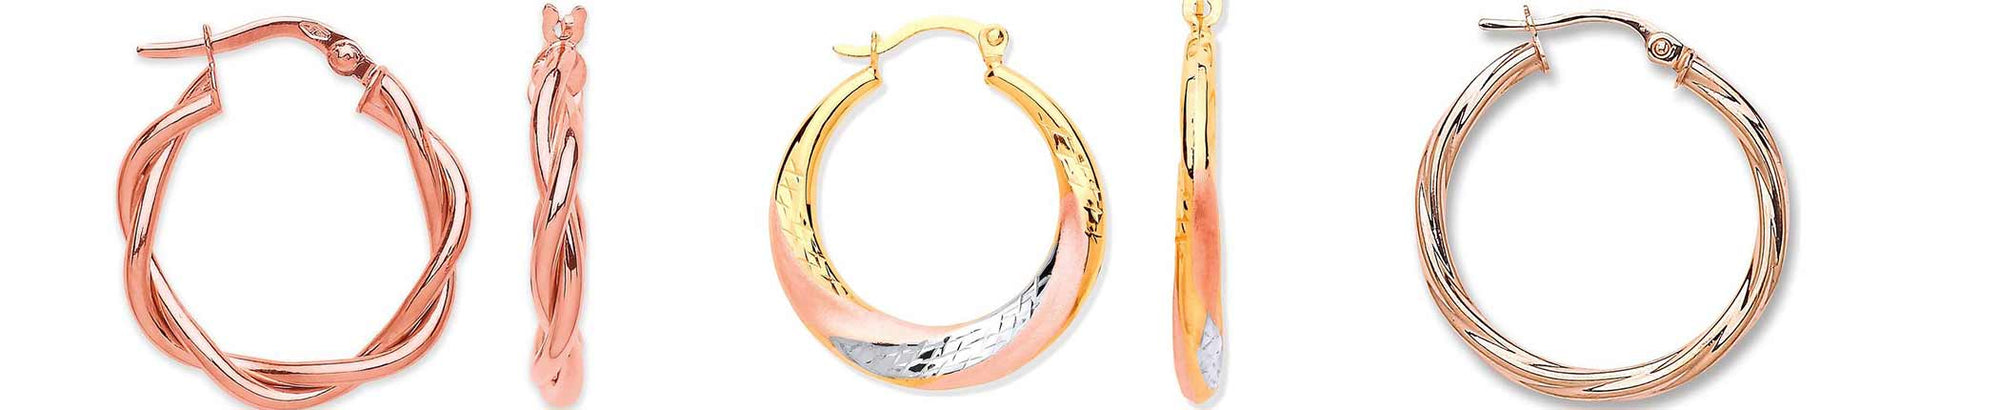 Why We Love Rose Gold Hoop Earrings (And You Should, Too!)